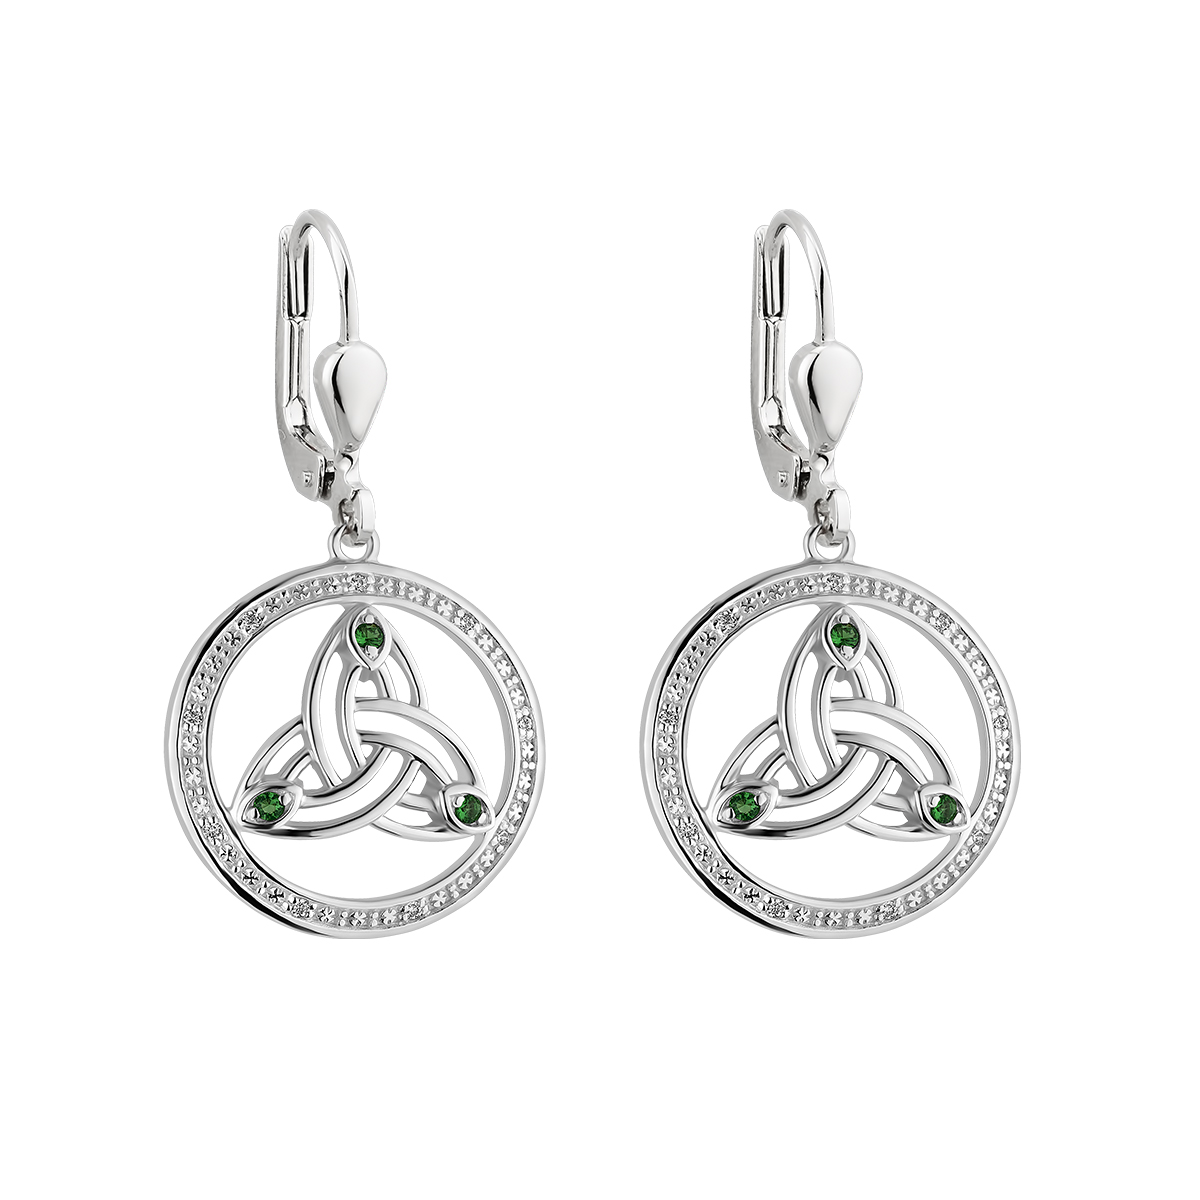 Irish Earrings | Sterling Silver Crystal Round Drop Celtic Trinity Knot ...